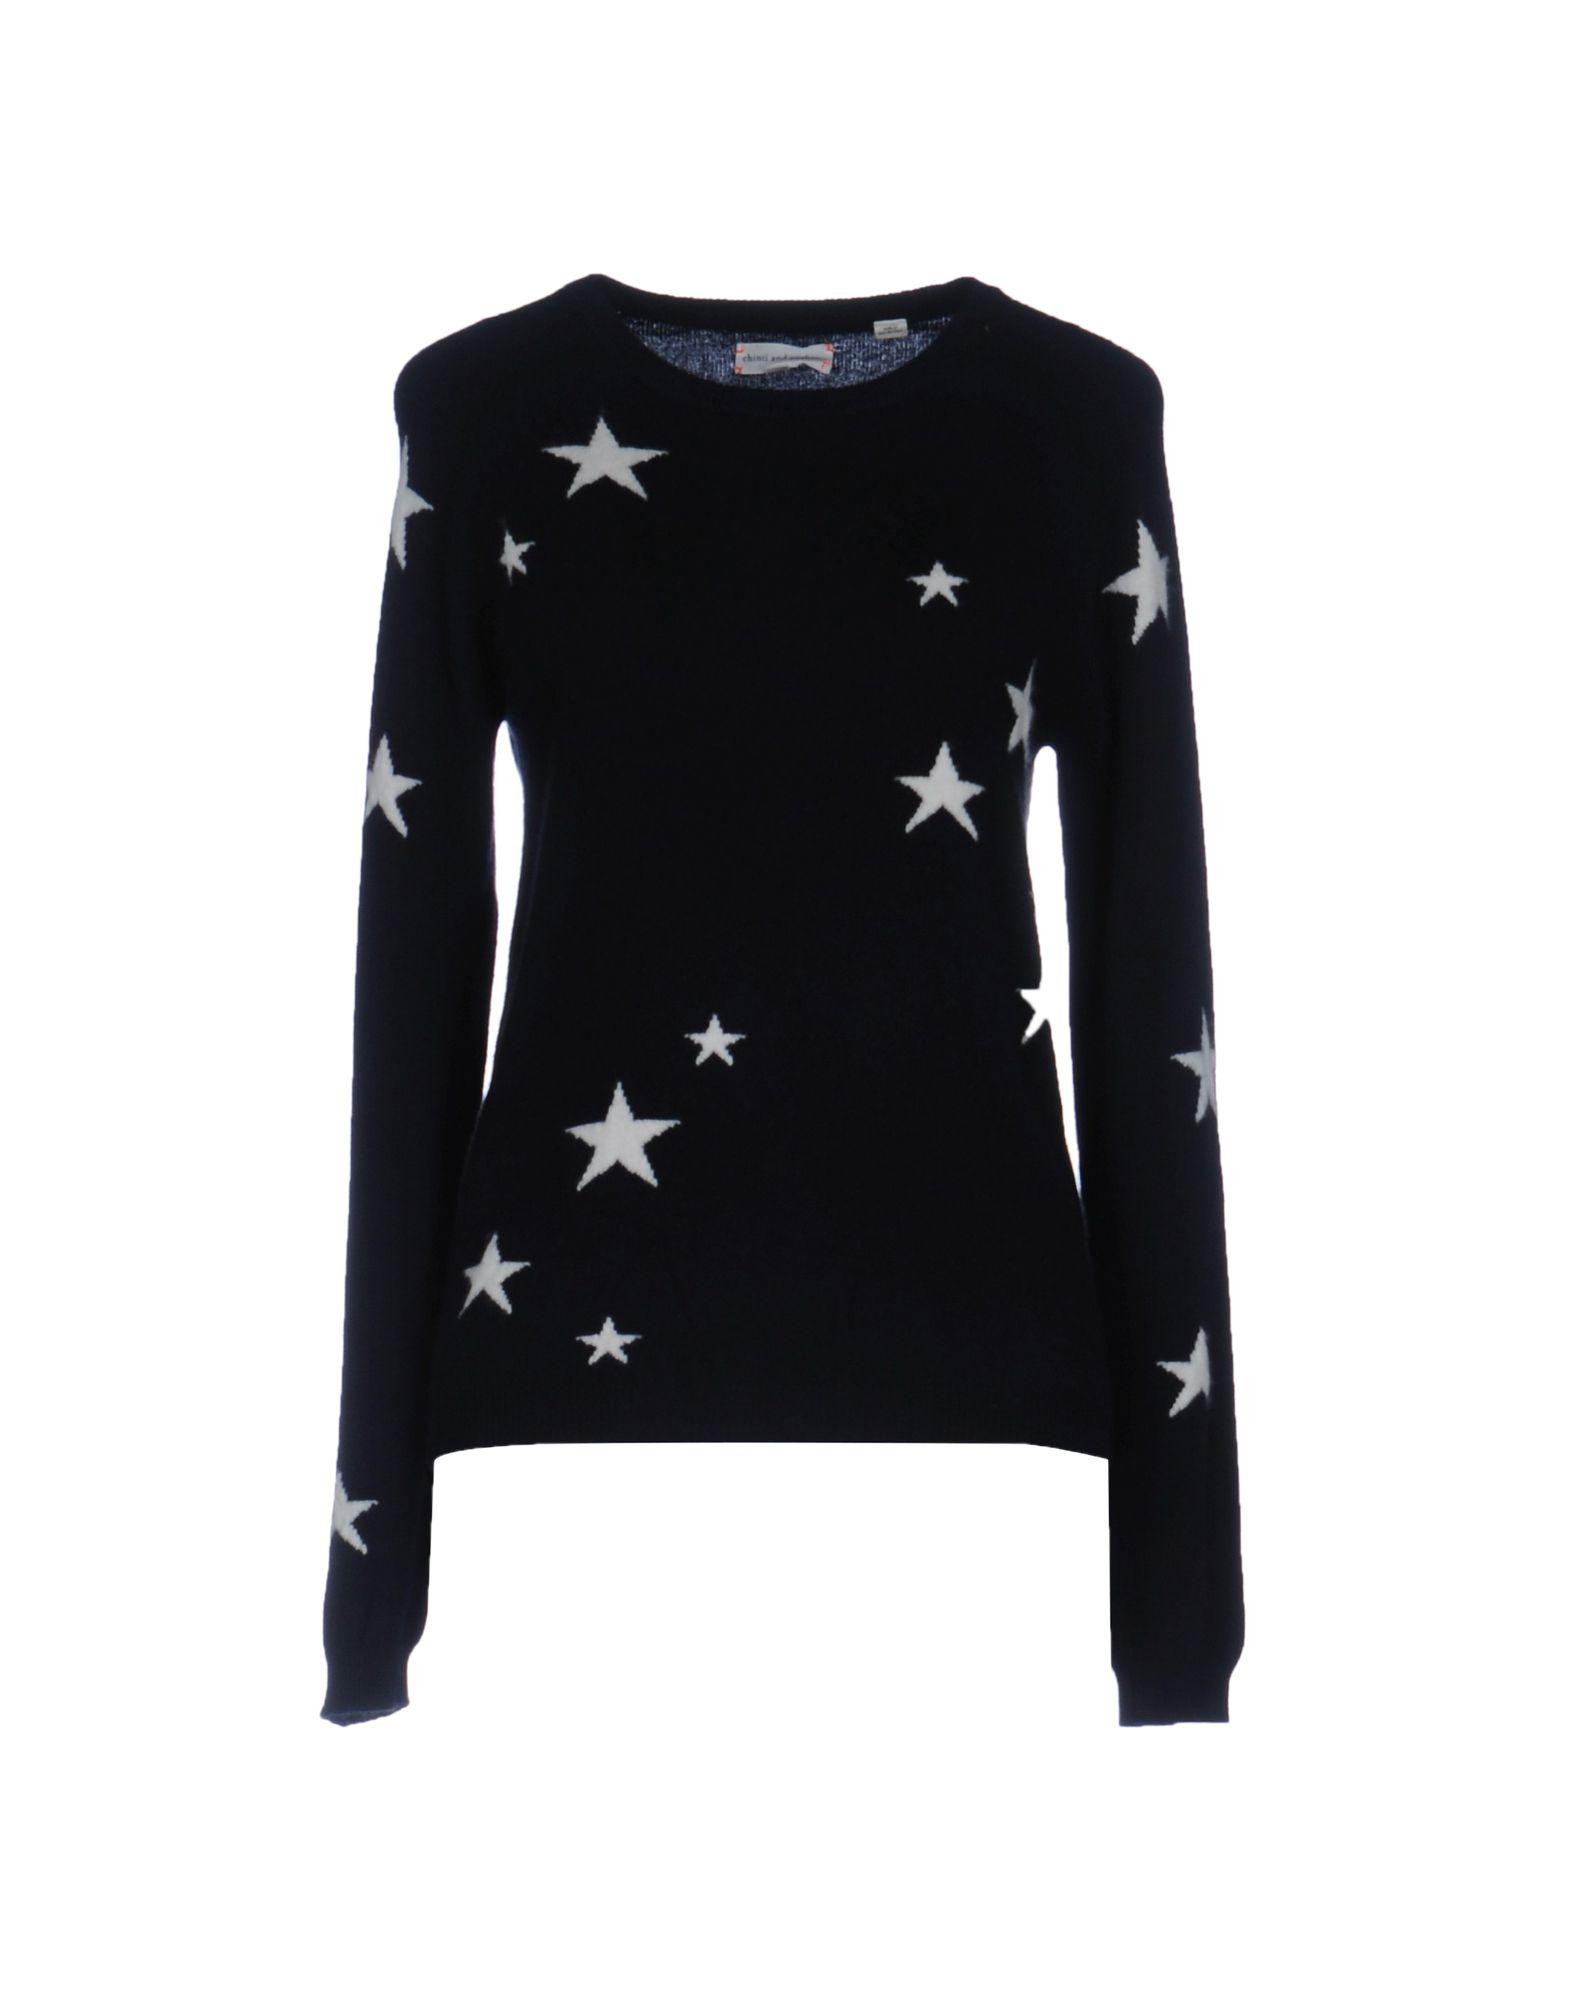 Lyst - Chinti & parker Star Intarsia Sweater in Blue - Save 61%